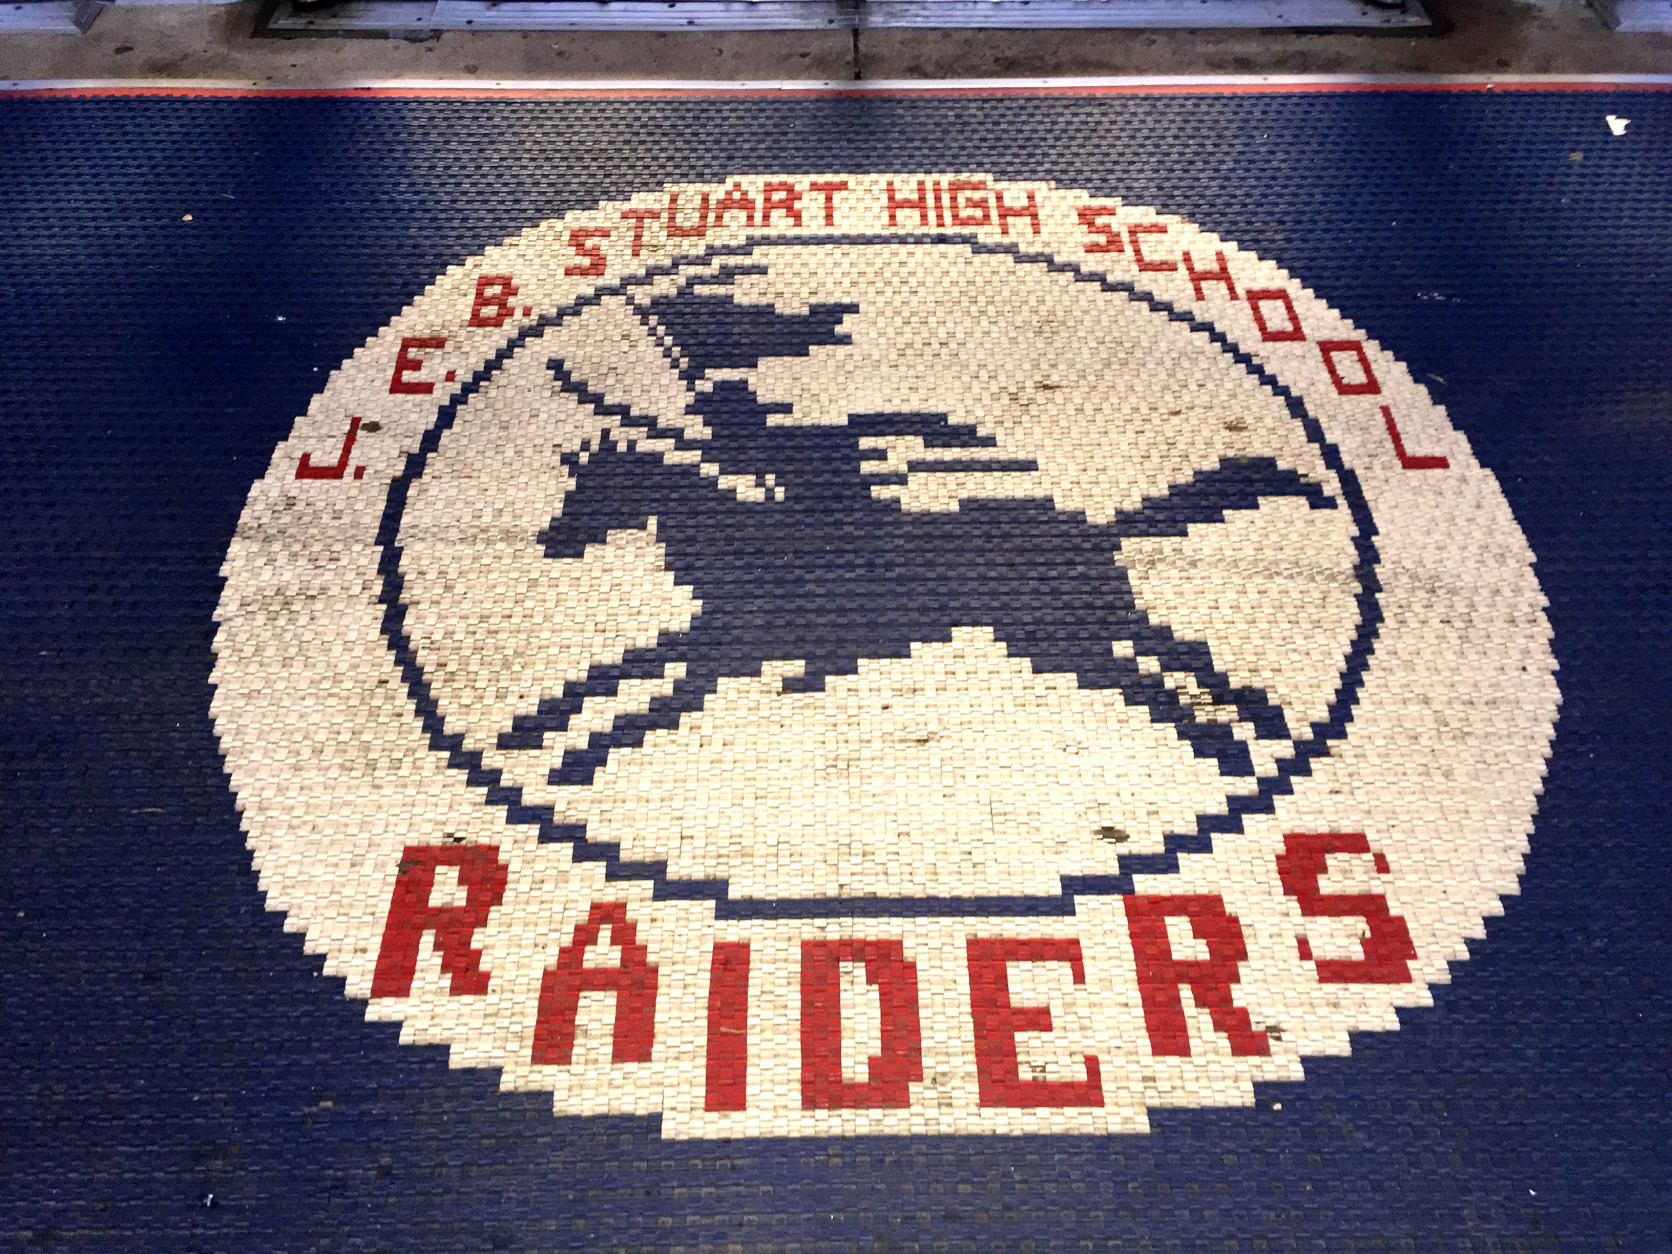 The debate over whether to change J.E.B. Stuart High School's name has been going on for months. A recent survey found 56 percent of community members oppose changing the name. Others say it's disrespectful to honor the school's namesake, a Confederate leader. (WTOP/Michelle Basch)